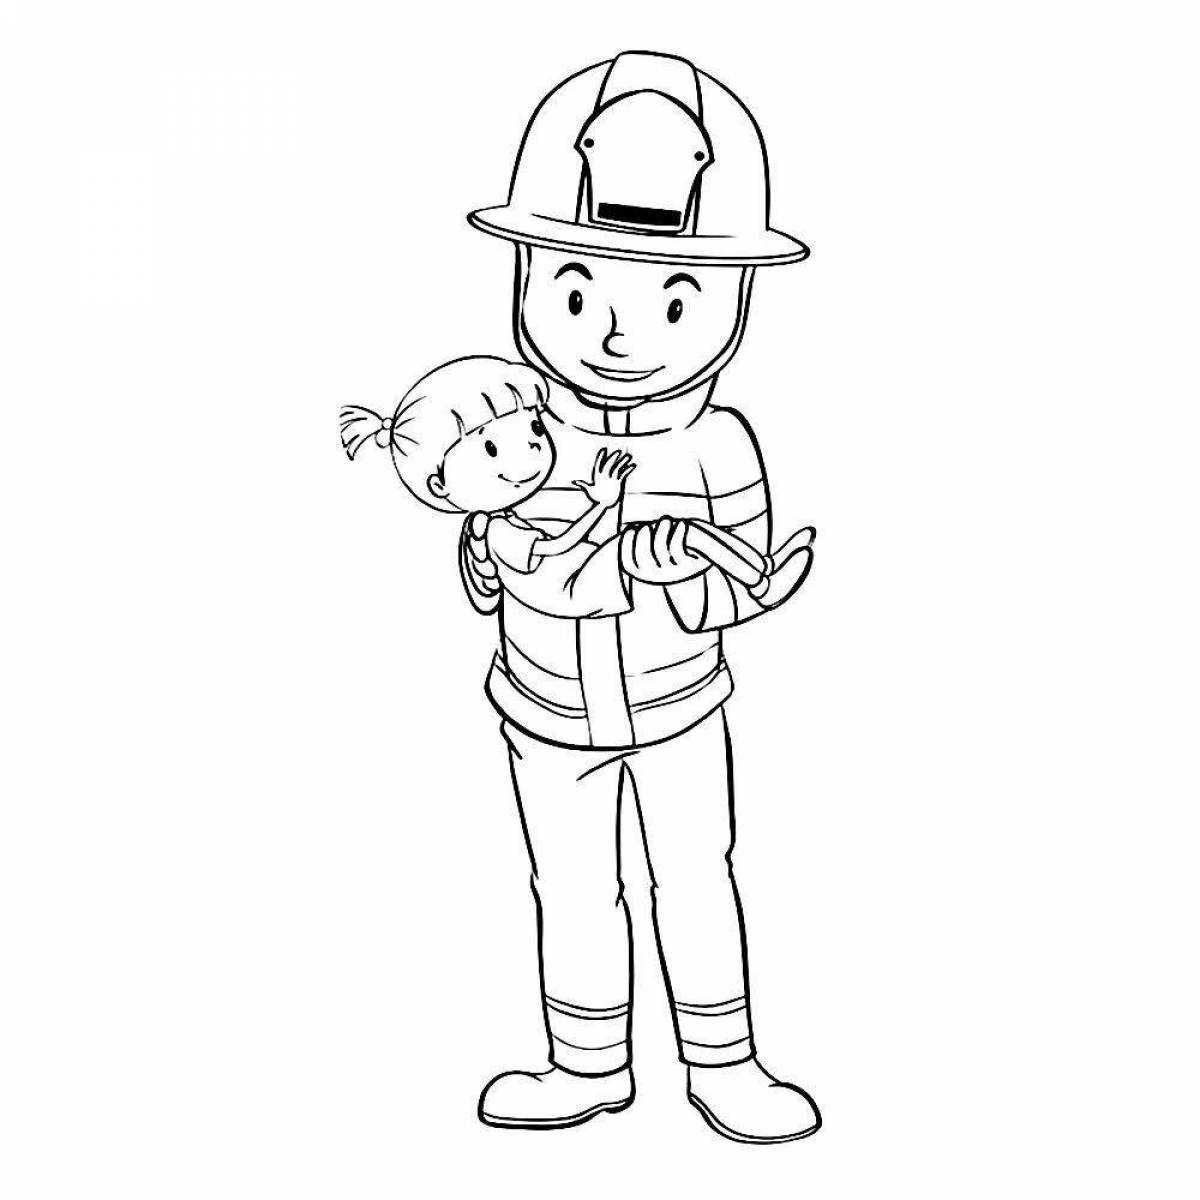 Coloured explosion rescuers coloring page